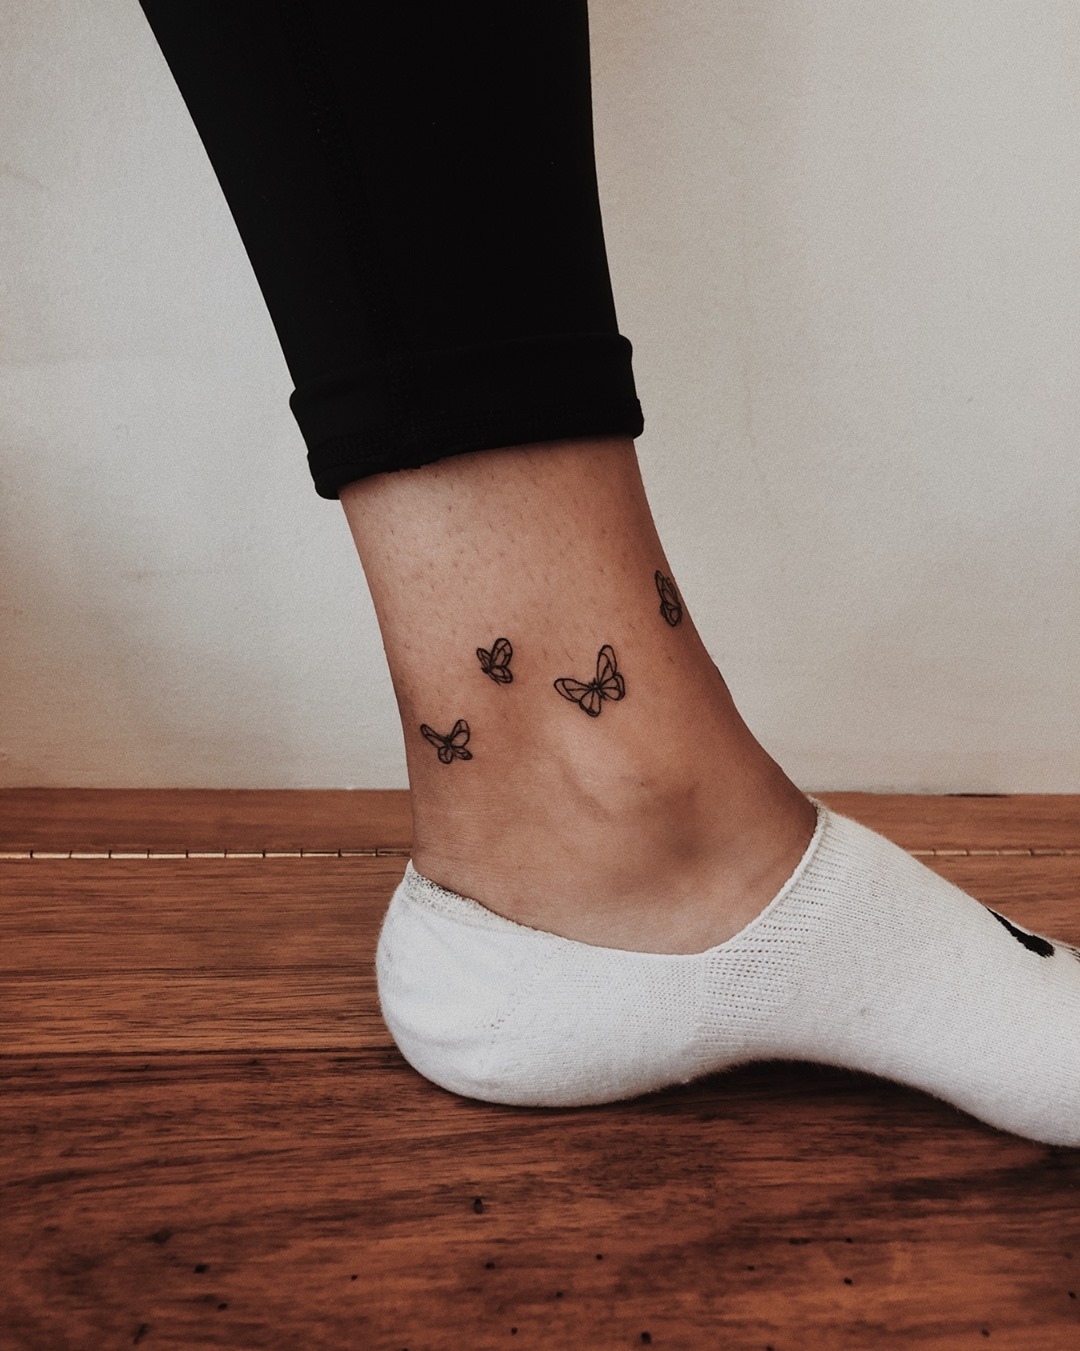 Butterflies are used to symbolize a fun path and a loving journey that’s ahead. If you’re someone who likes to travel and you like feminine tattoos, this will suit you.